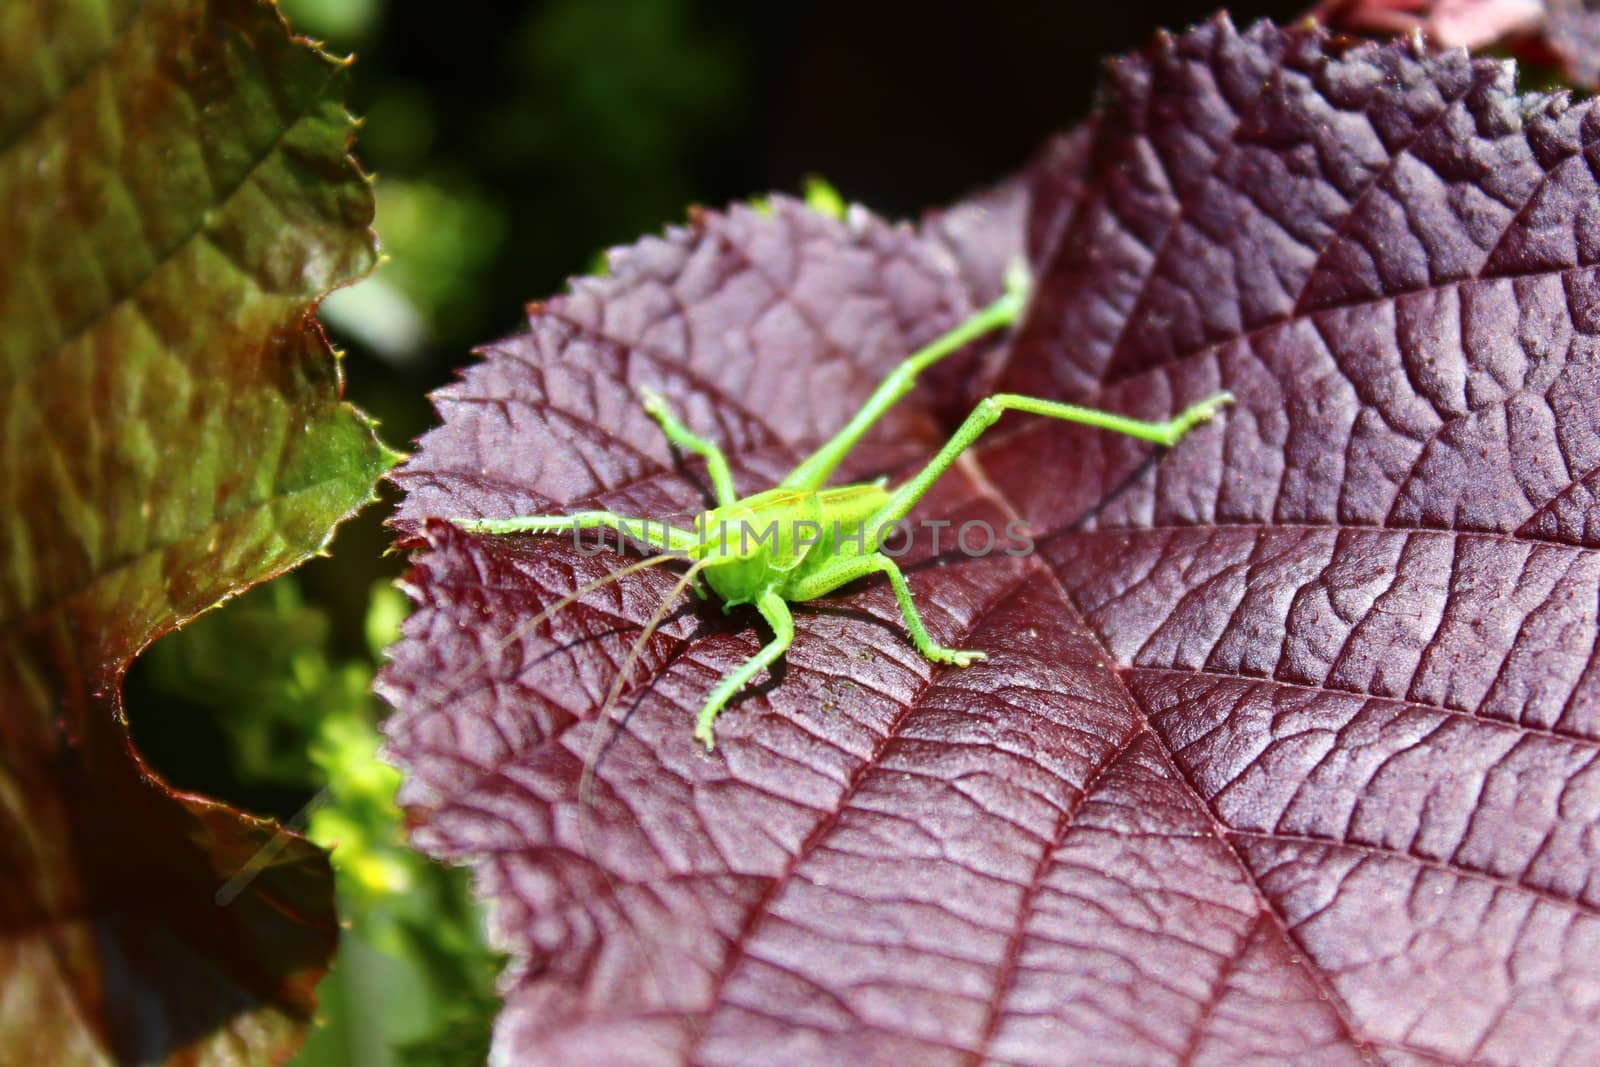 The picture shows a grasshopper on a leaf.